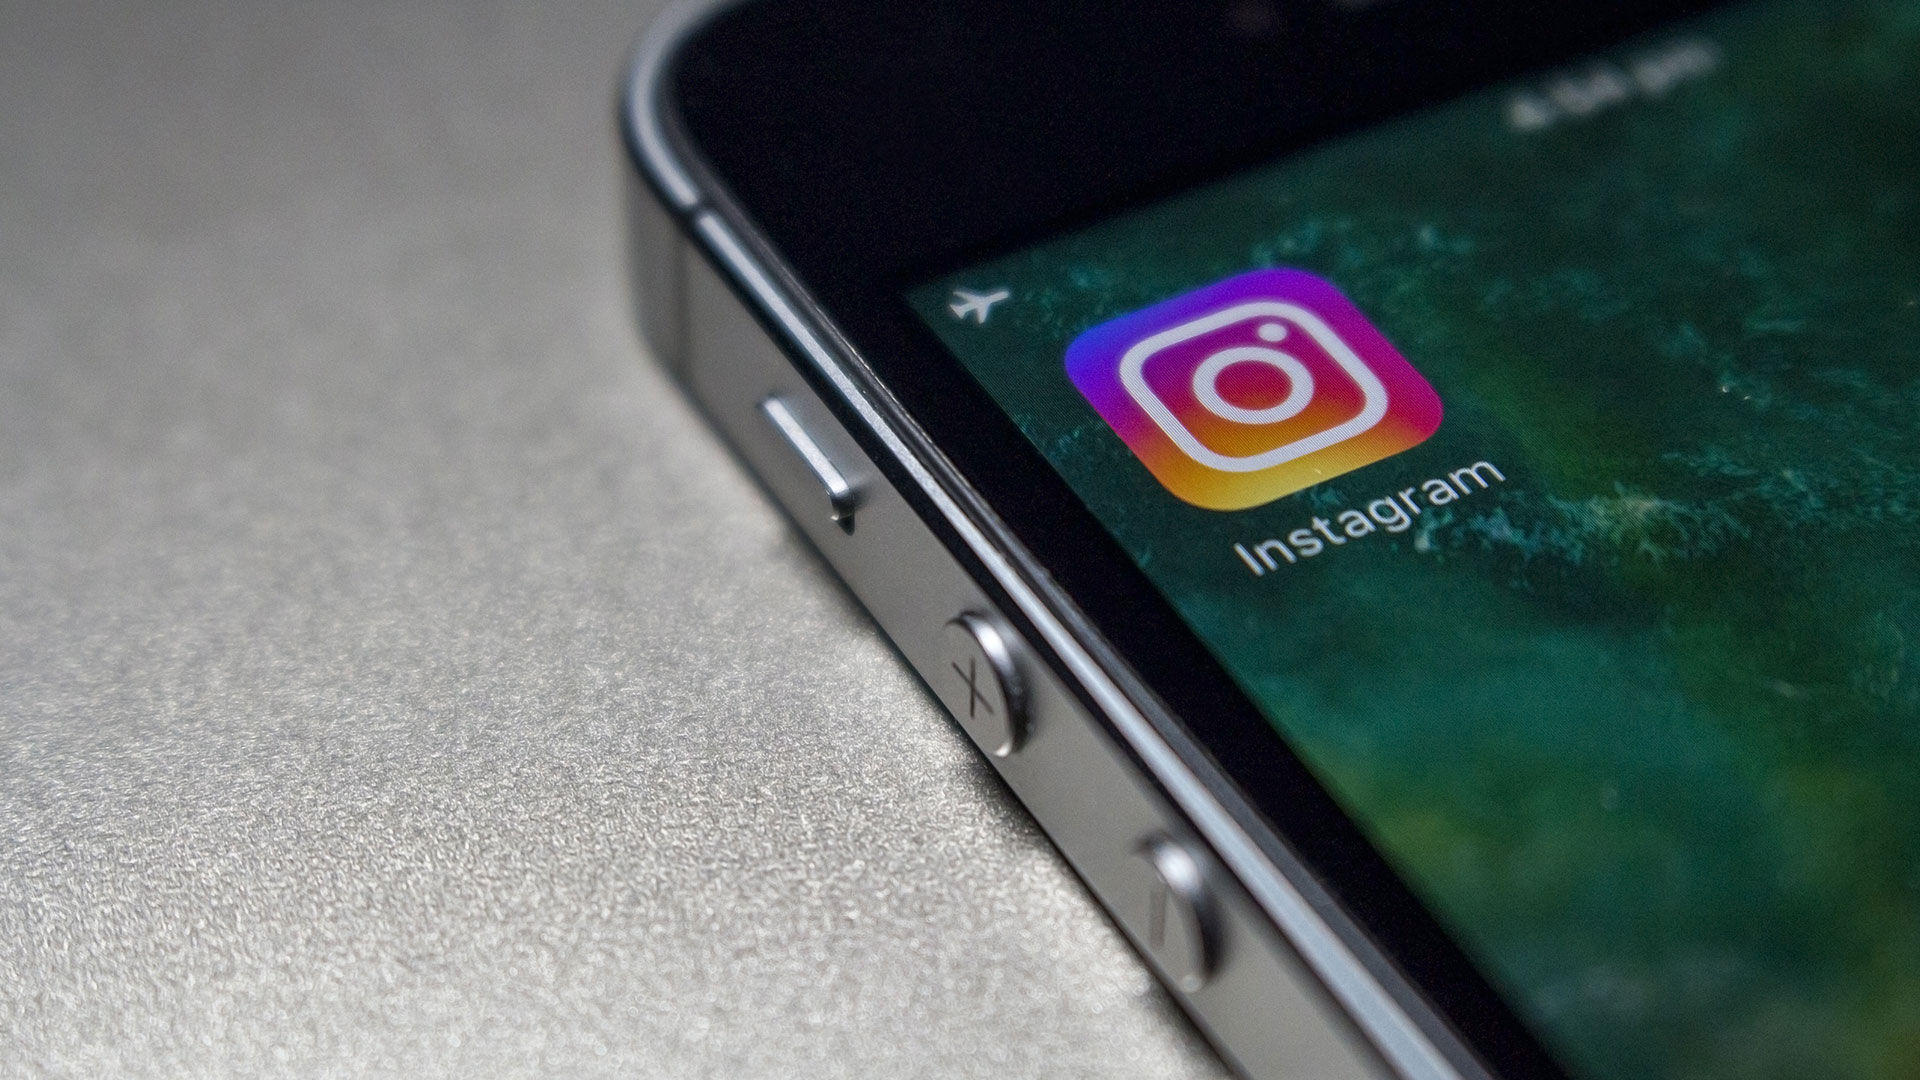 How to Remove an Instagram Account From Phone